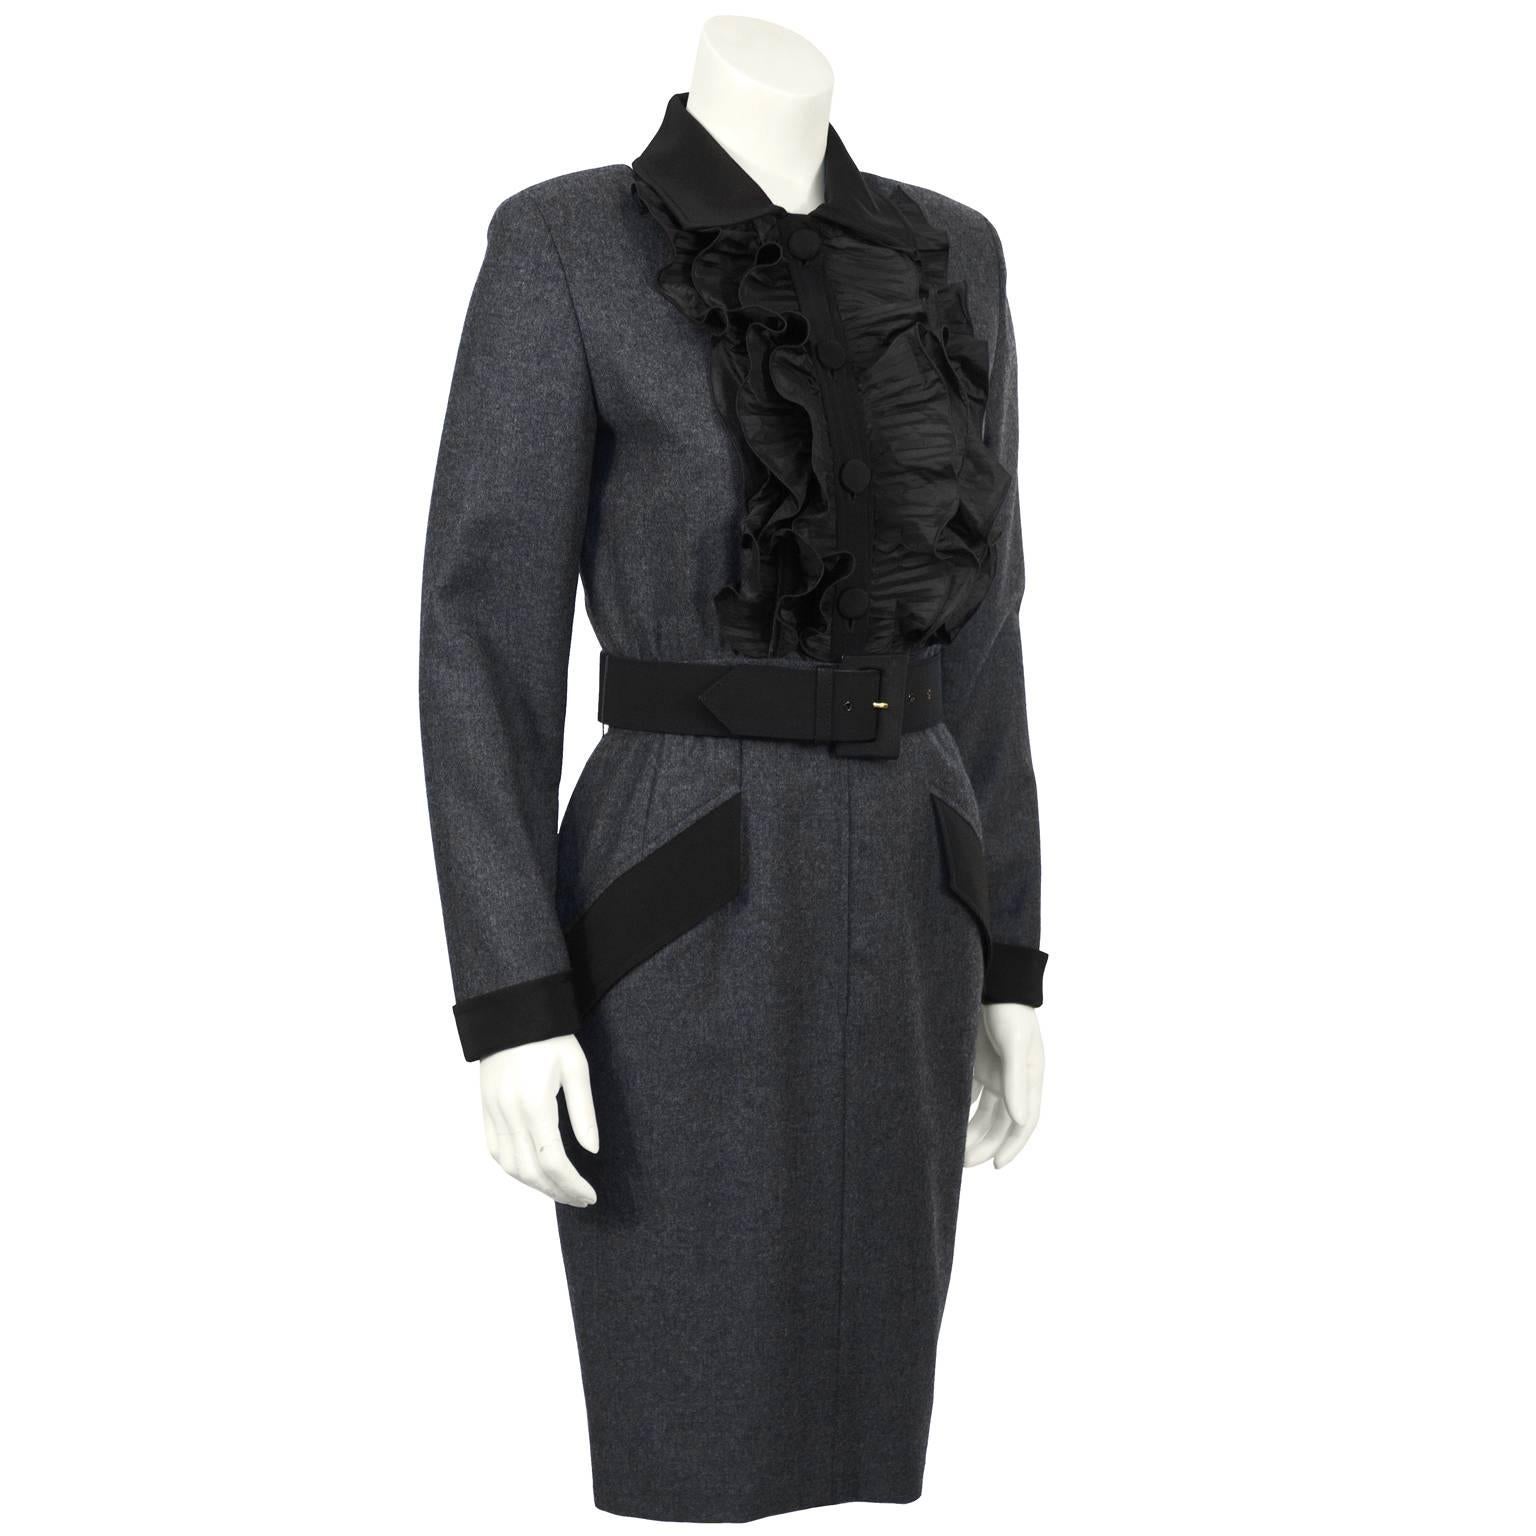 Valentino 1980's charcoal wool flannel belted dress. Sophisticated pleated silk ruffled jabot with wool placket and fabric covered buttons. The narrow skirt has a hidden zipper down the front. Topped off with a black fabric collar, cuffs and pocket